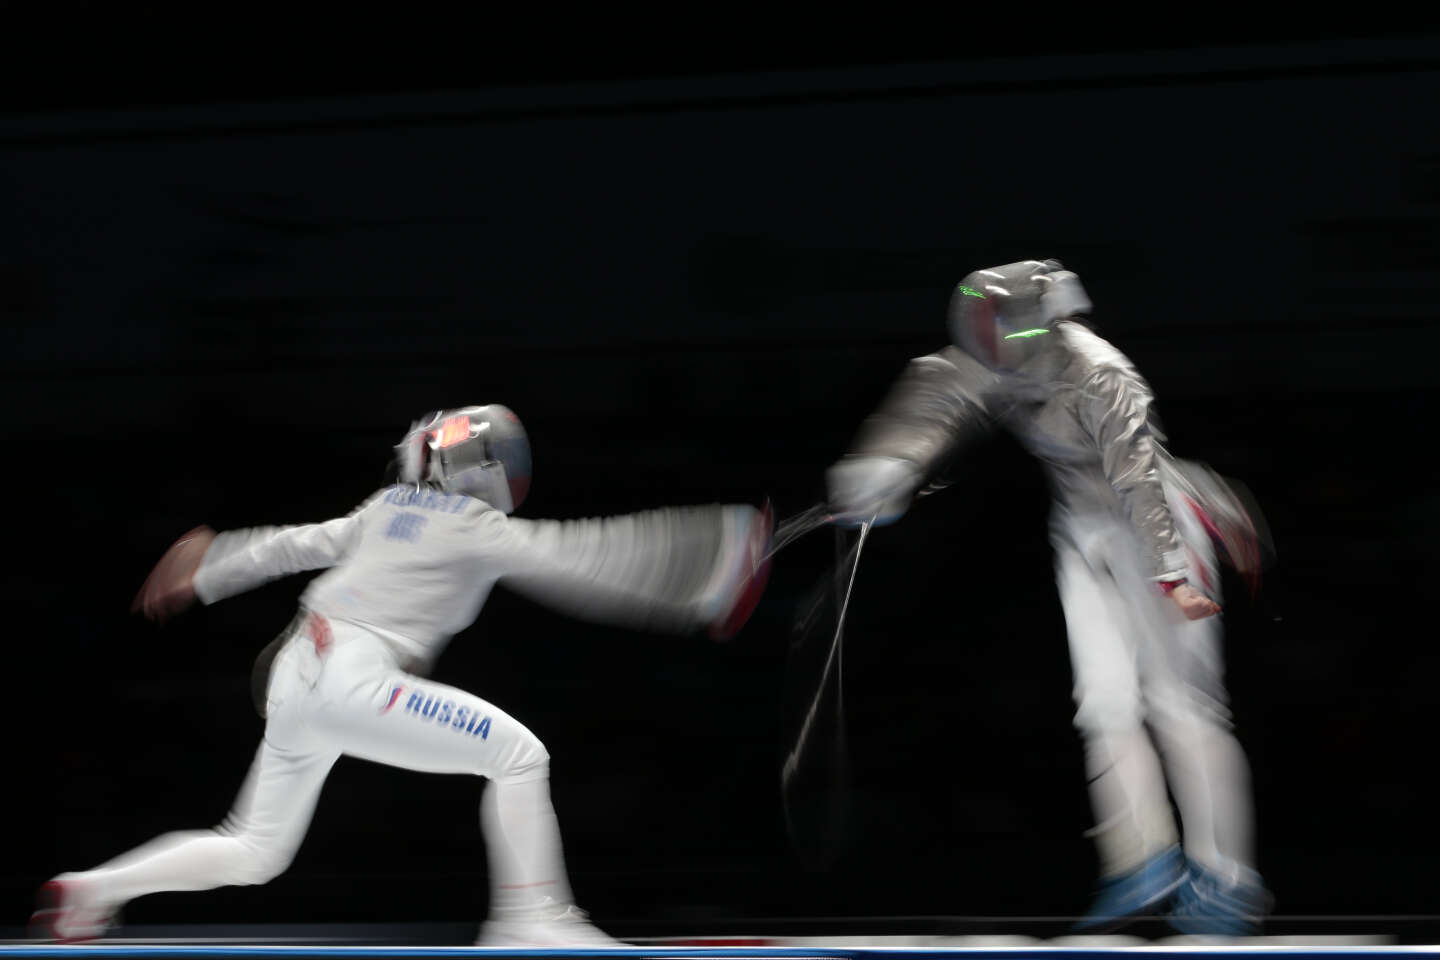 Germany gives up hosting a fencing qualifier due to the return of the Russians